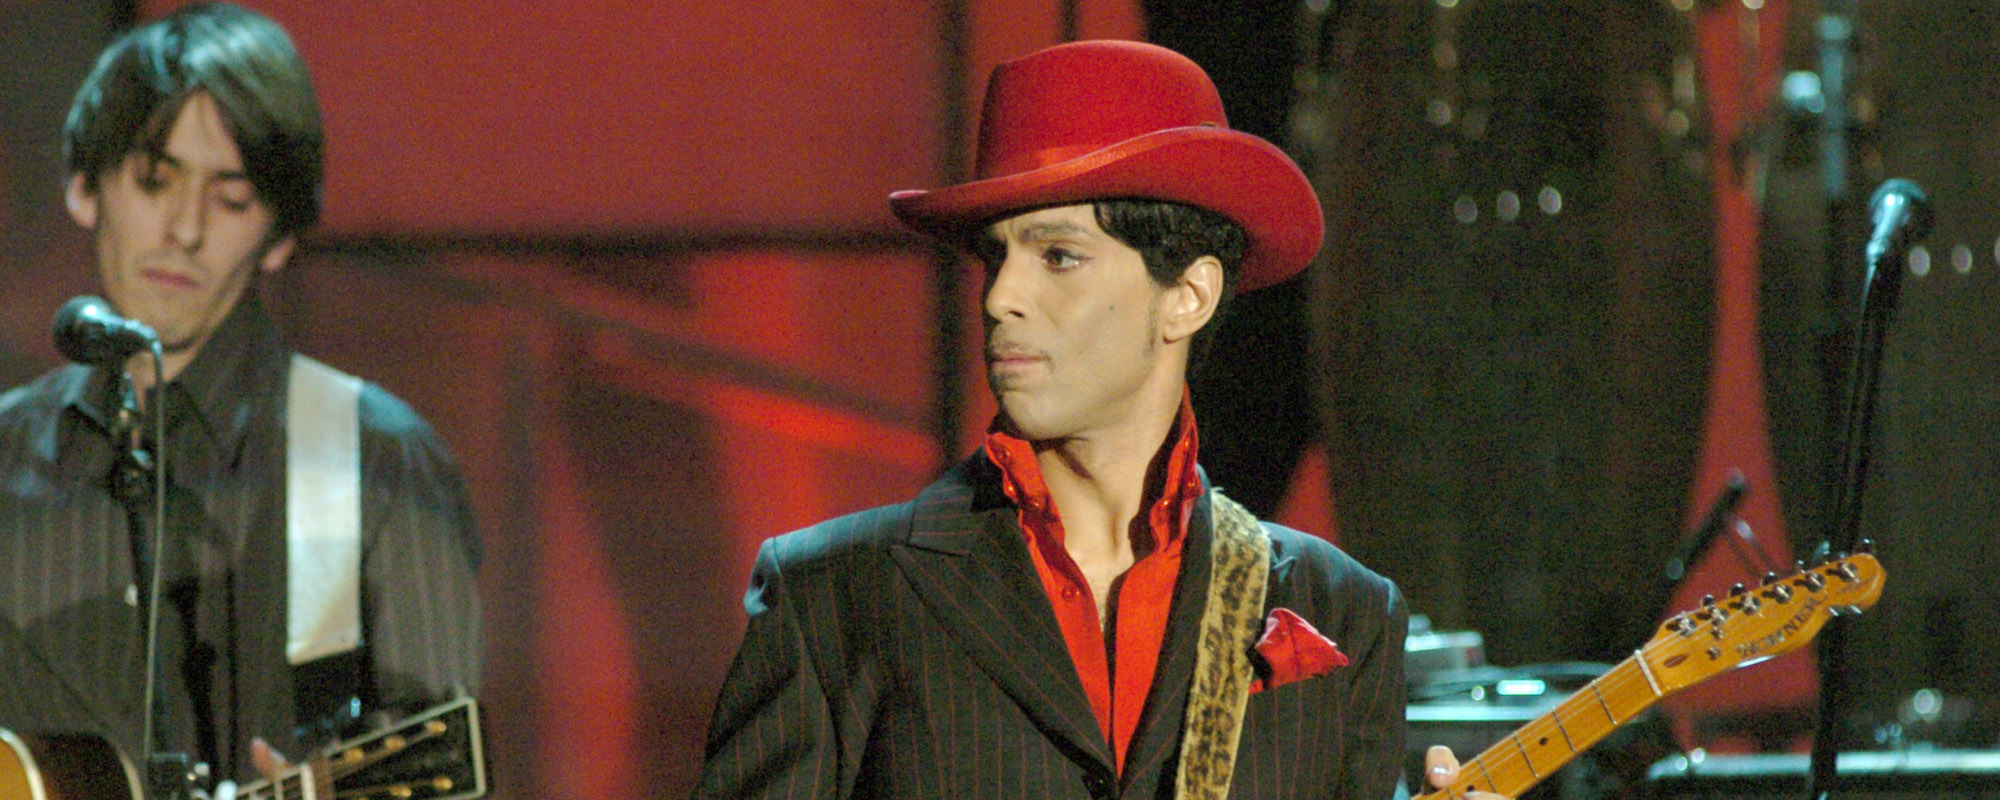 Remember When: Prince Makes His Guitar Gently Weep at the Rock & Roll Hall of Fame